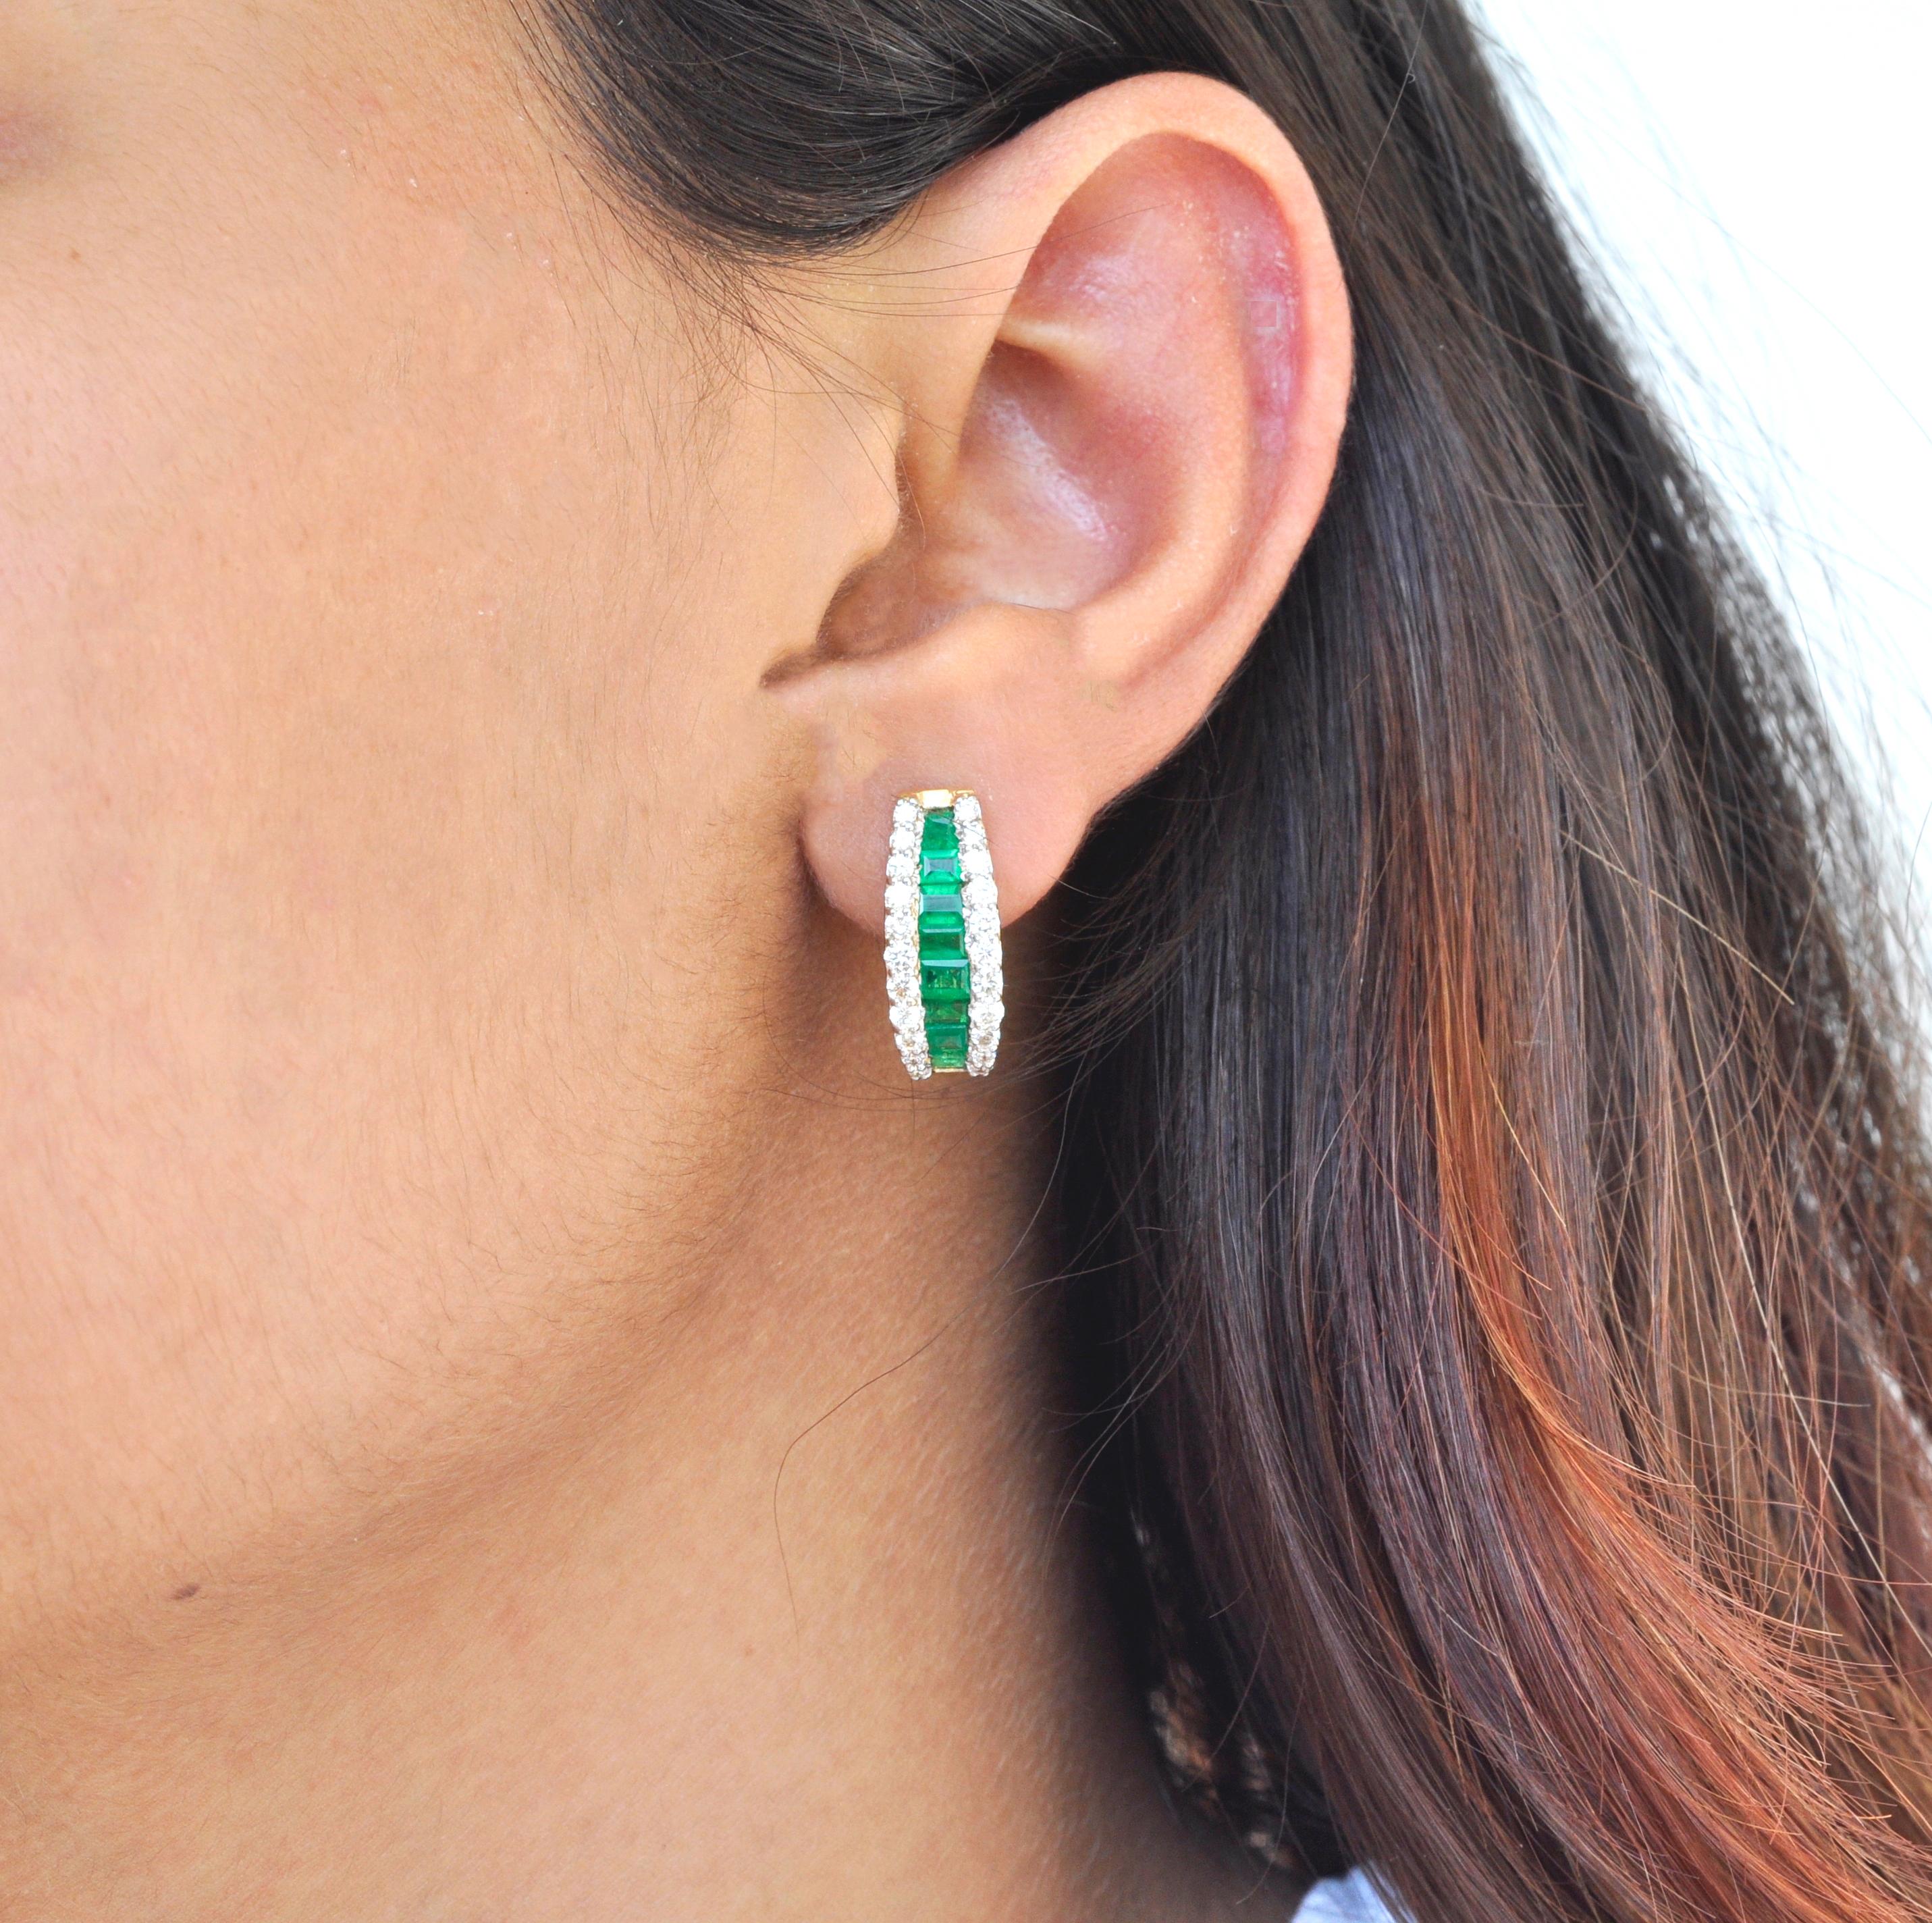 18 karat yellow gold channel set emerald baguette diamond linear huggie hoop earrings

This exclusive emerald huggie-hoop earrings is stunning. The perfectly cut baguette-cut emeralds tapering towards the ends in a channel setting are incorporated